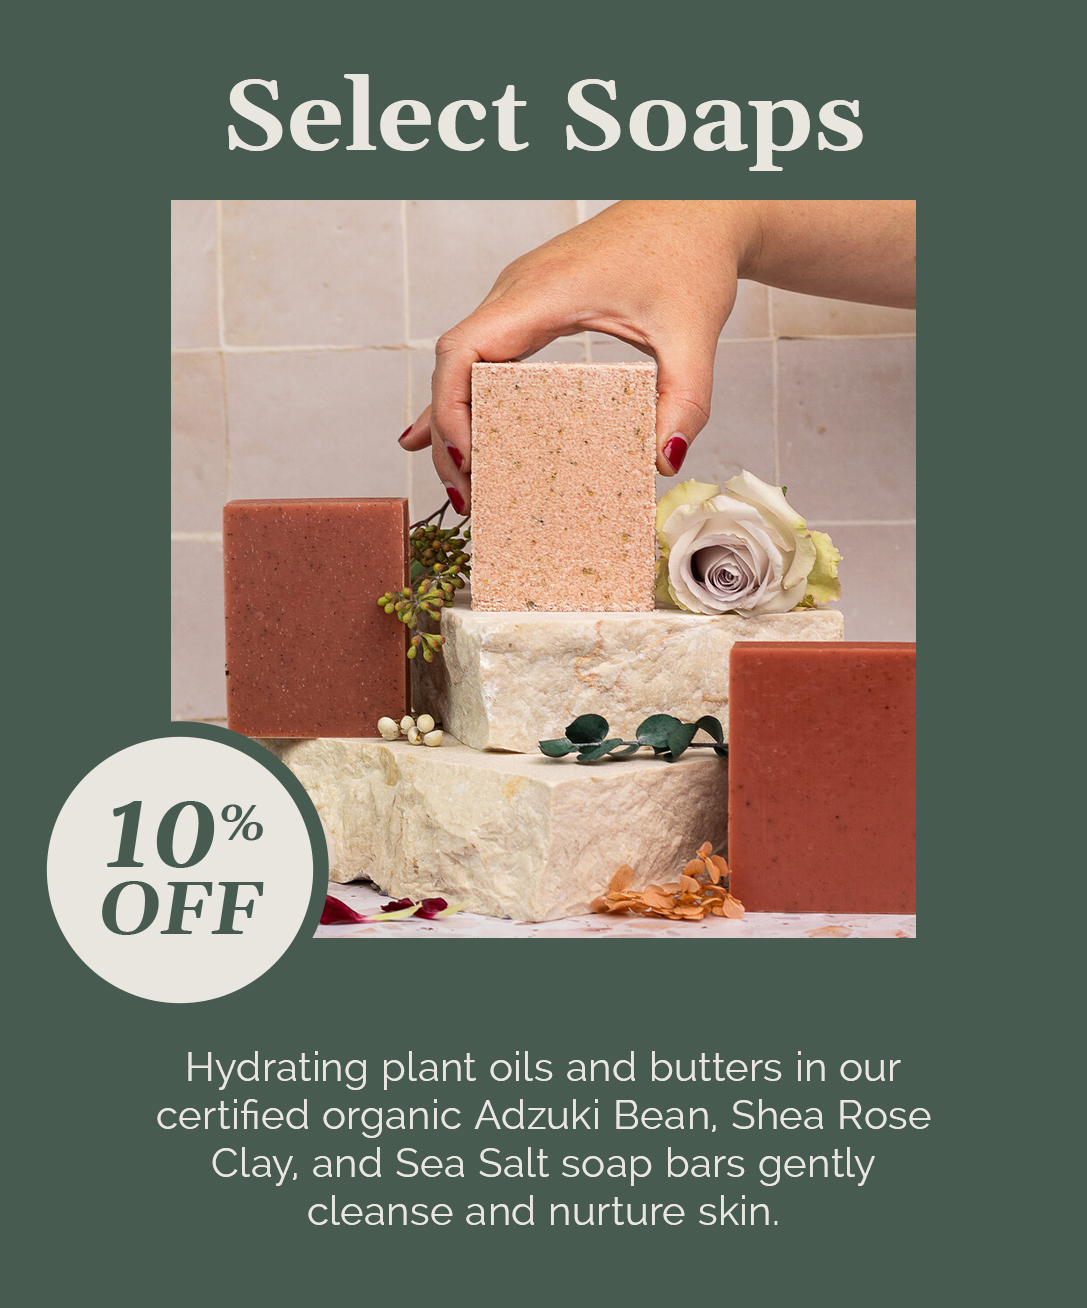 10% Off Select Soaps